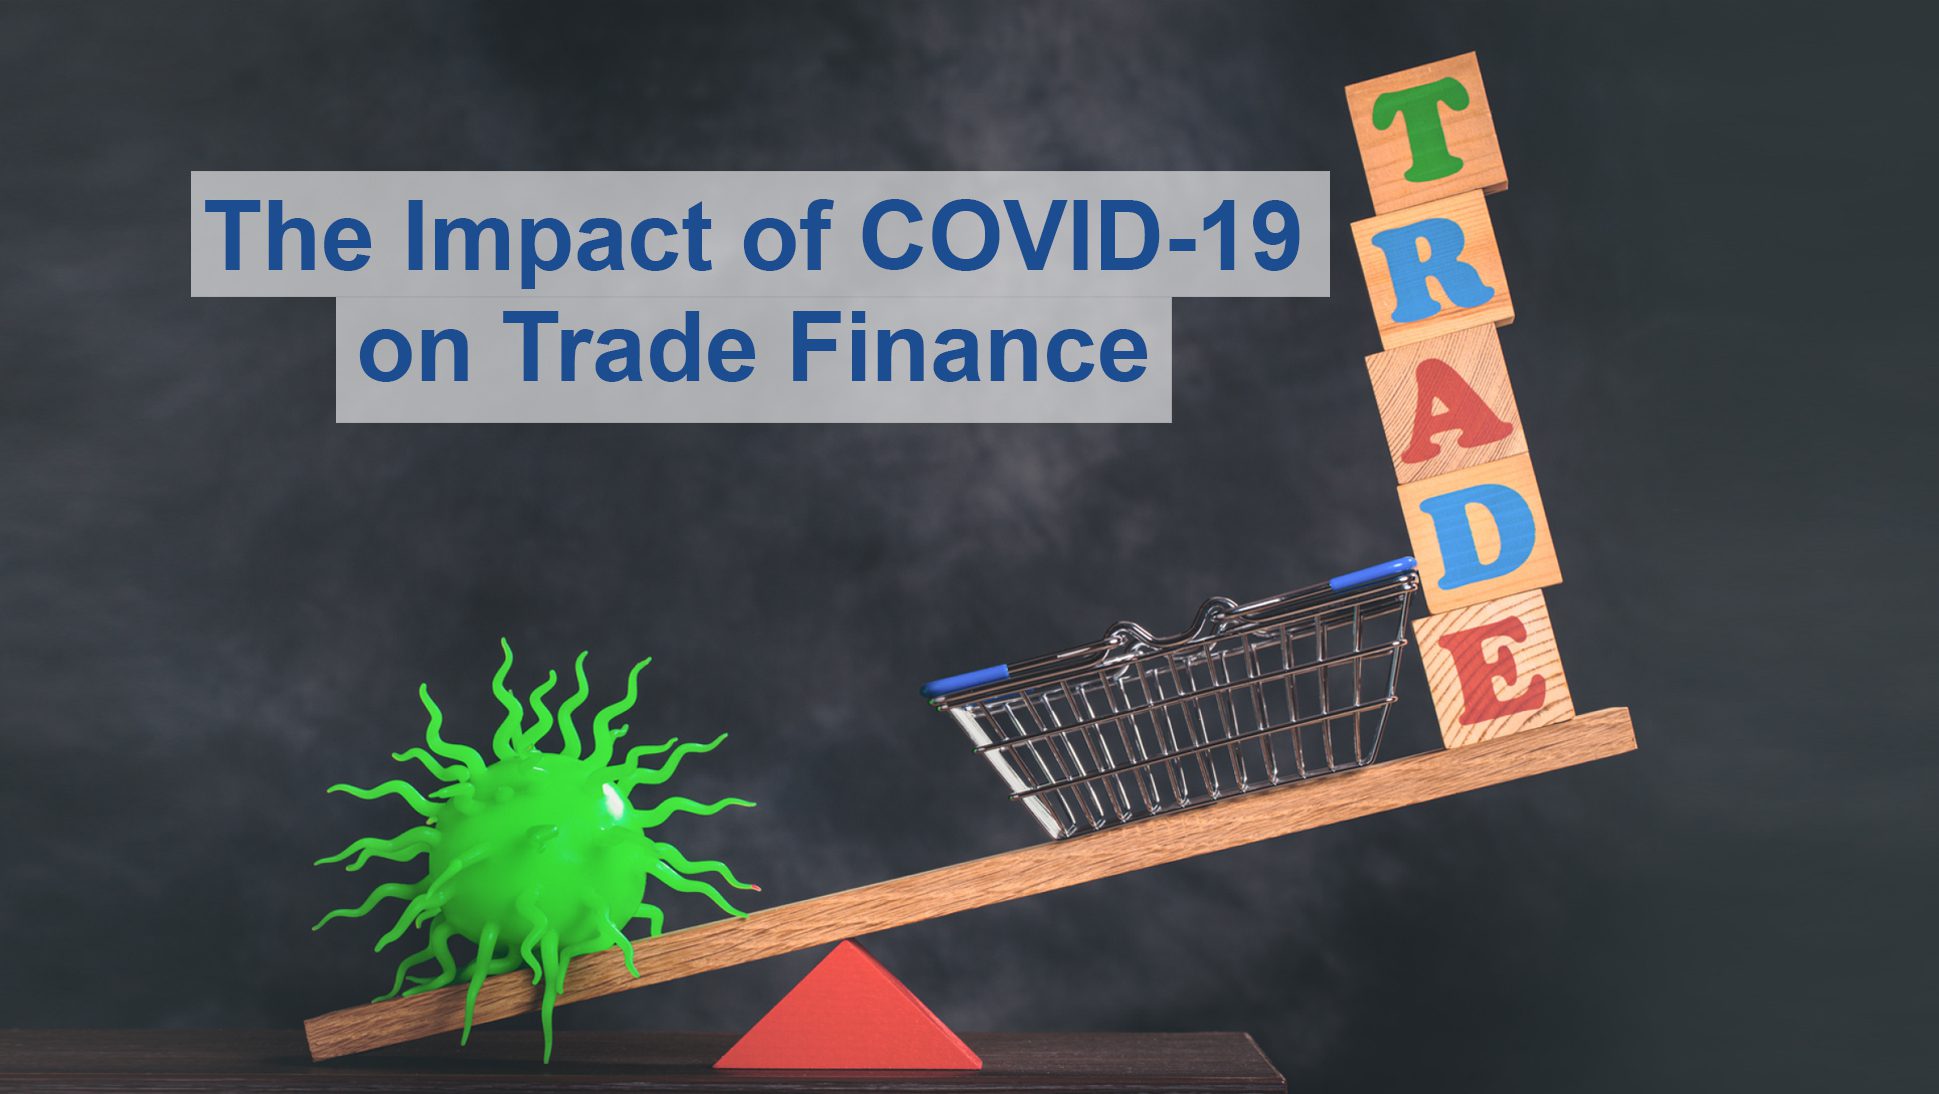 The image illustrates the impact of COVID-19 on Trade and Trade Finance.